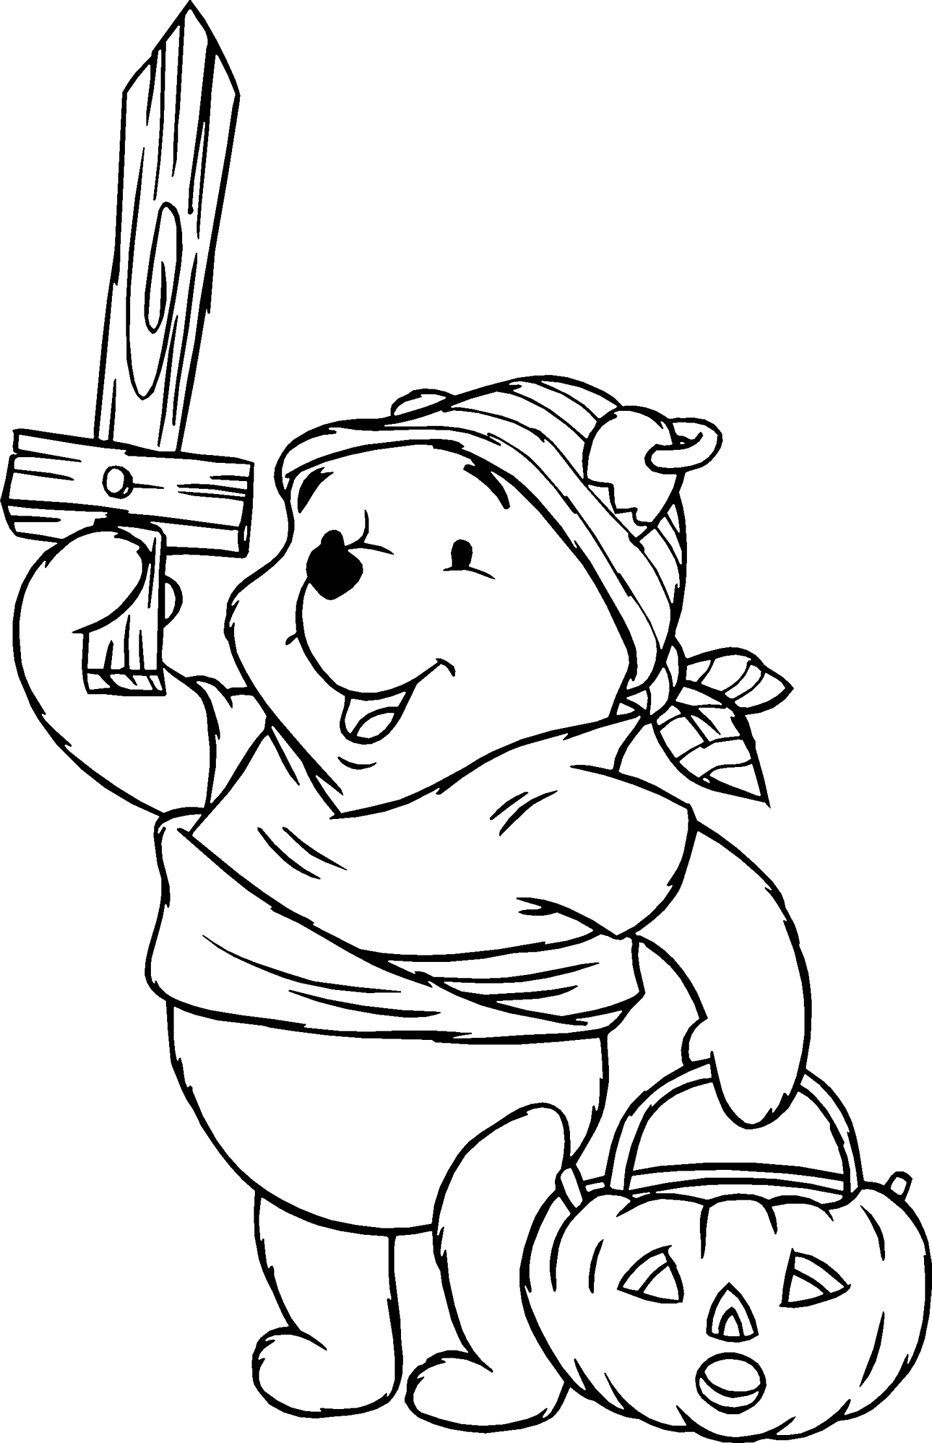 Free Printable Coloring Sheets For Kids
 24 Free Printable Halloween Coloring Pages for Kids